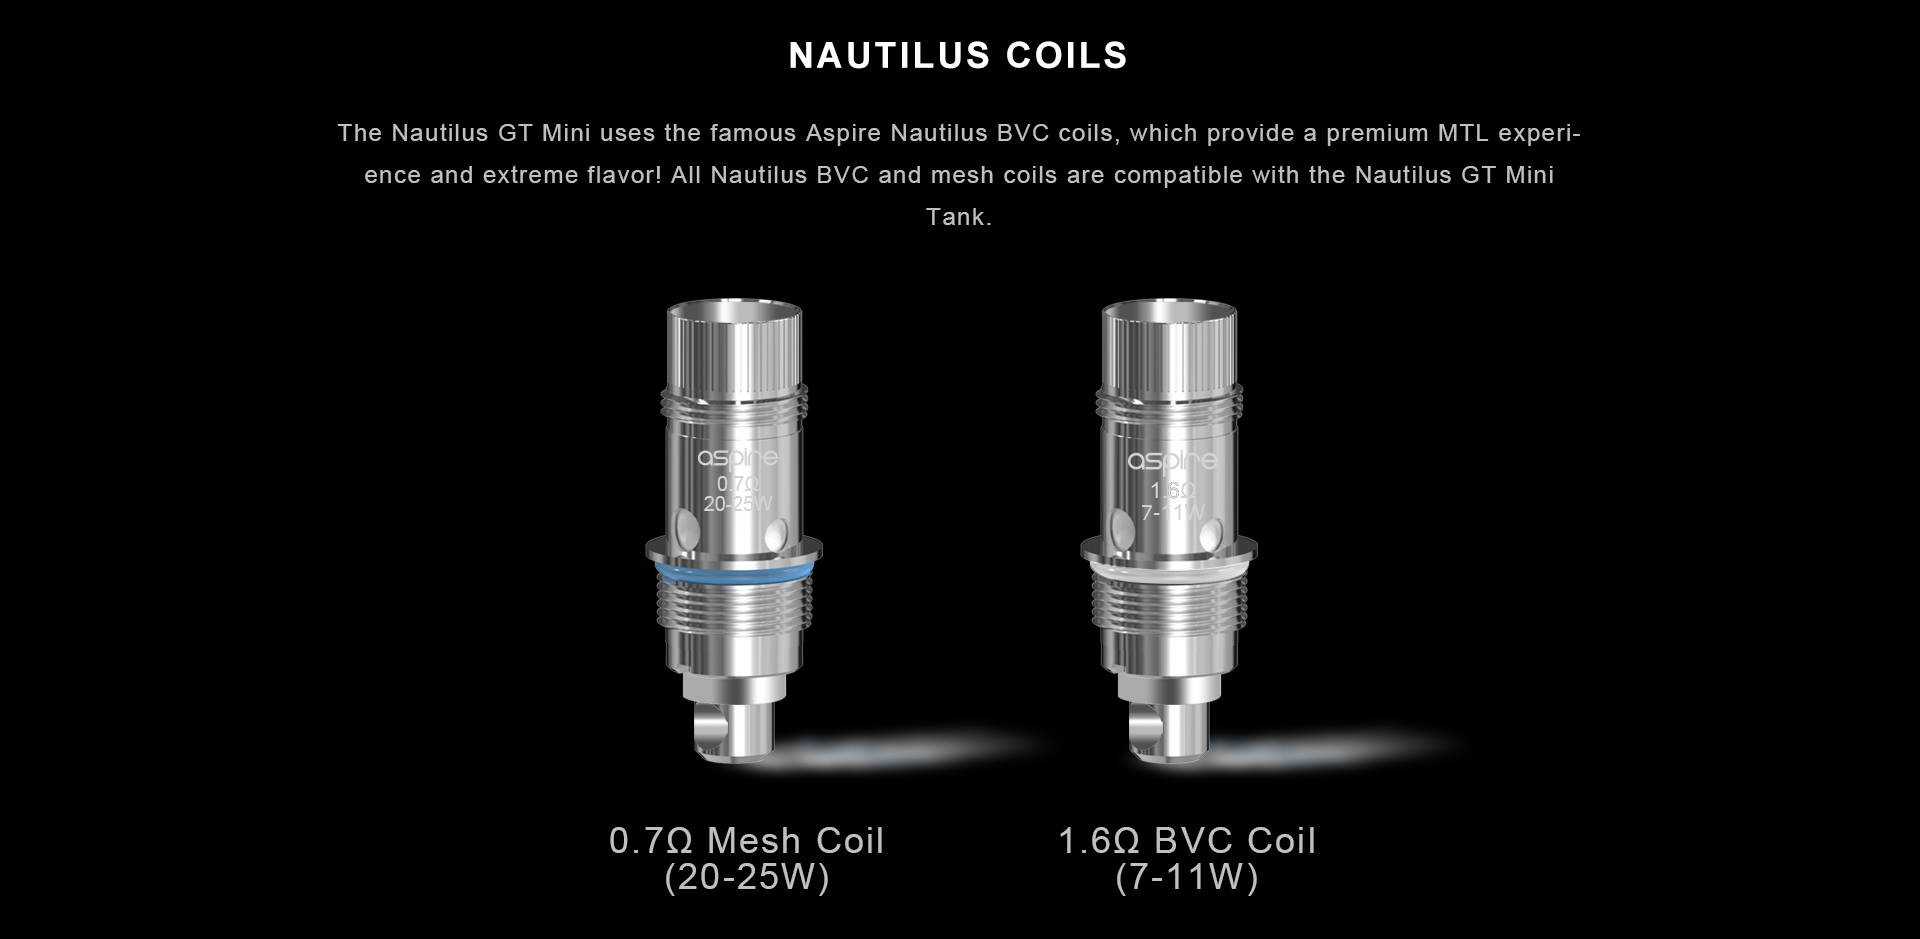 The Nautilus GT Mini uses the famous Aspire Nautilus BVC coils, which provide a premium MTL experience and extreme flavor! All Nautilus BVC and mesh coils are compatible with the Nautilus GT Mini Tank.